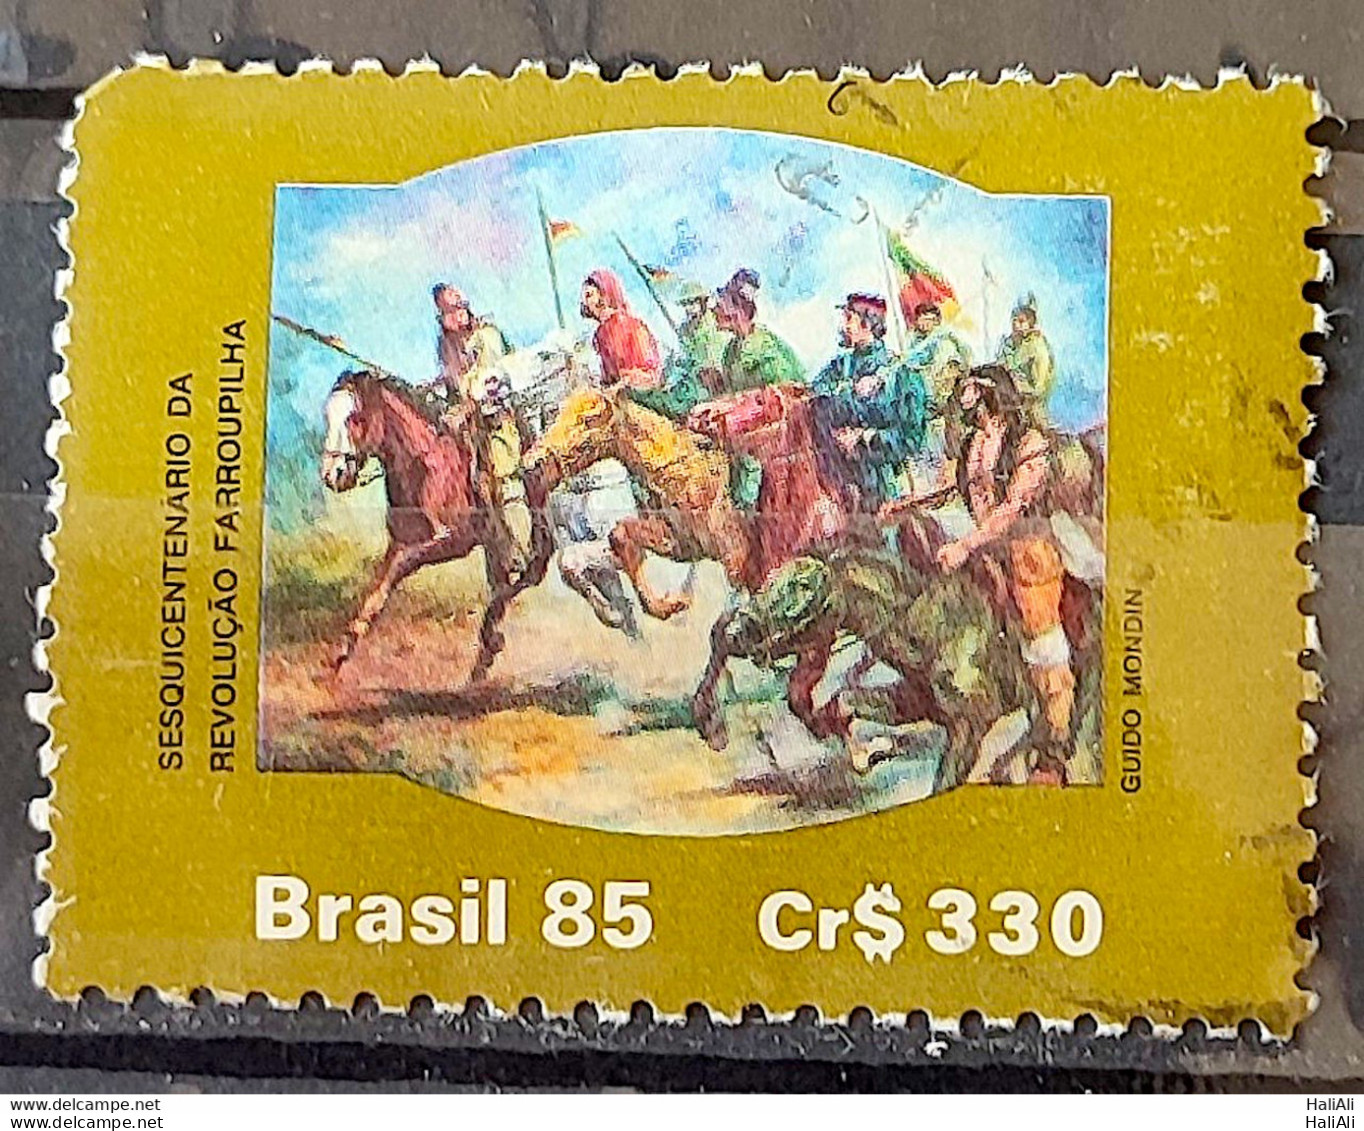 C 1481 Brazil Stamp 150 Years Revolution Military Farroupilha 1985 Circulated 1 - Used Stamps